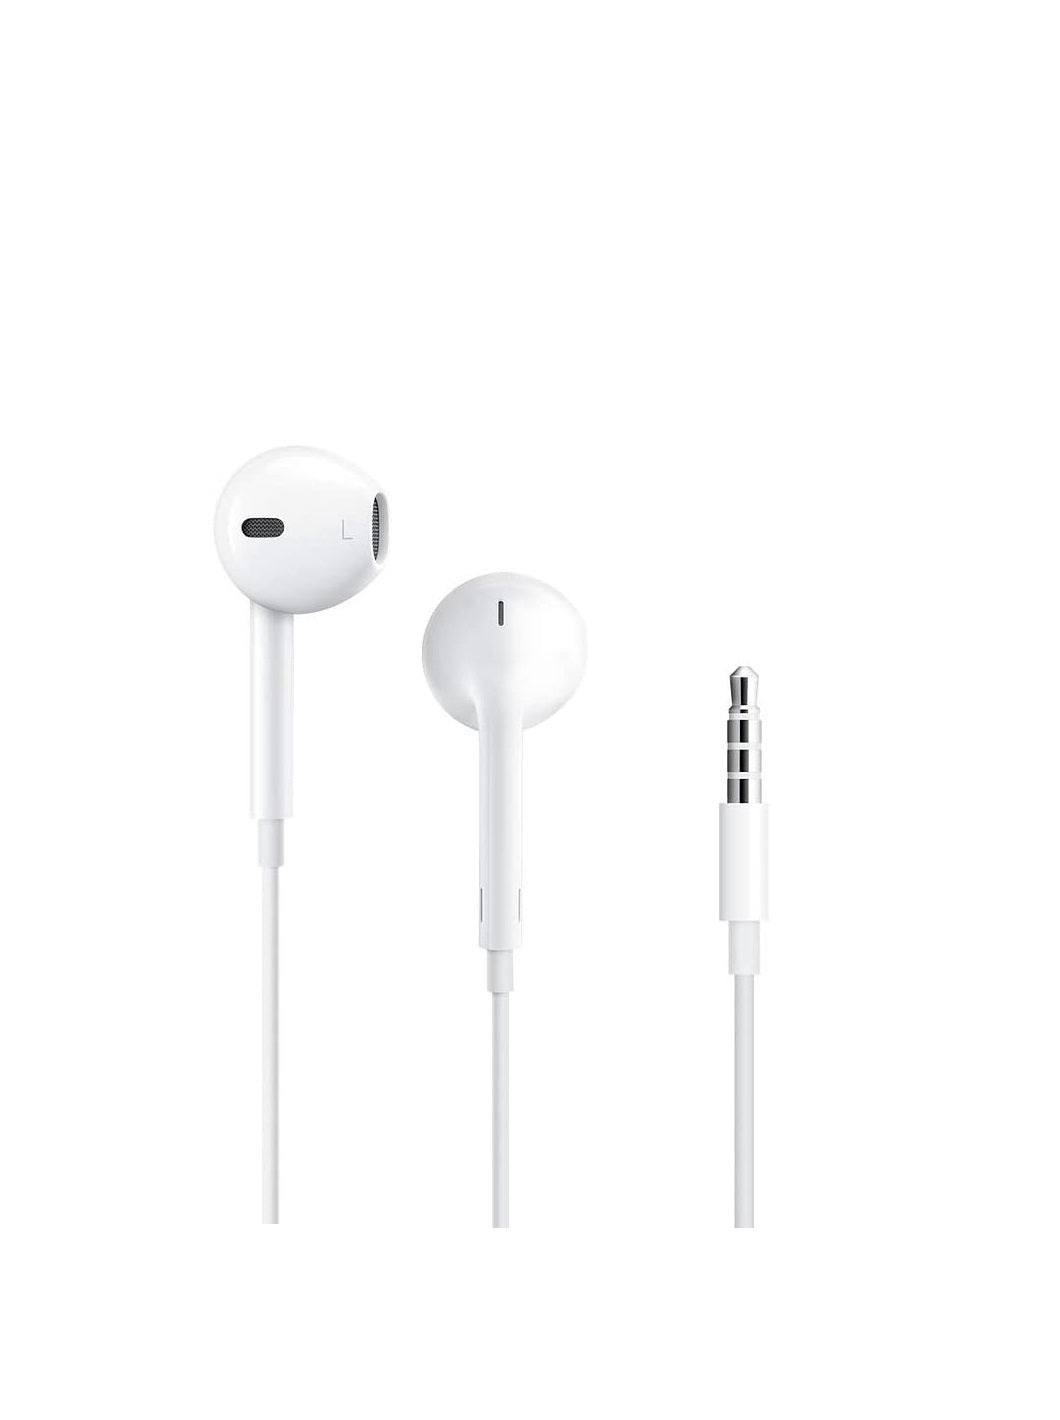 https://caserace.net/products/apple-earpods-with-3-5mm-headphone-plug-from-box-white